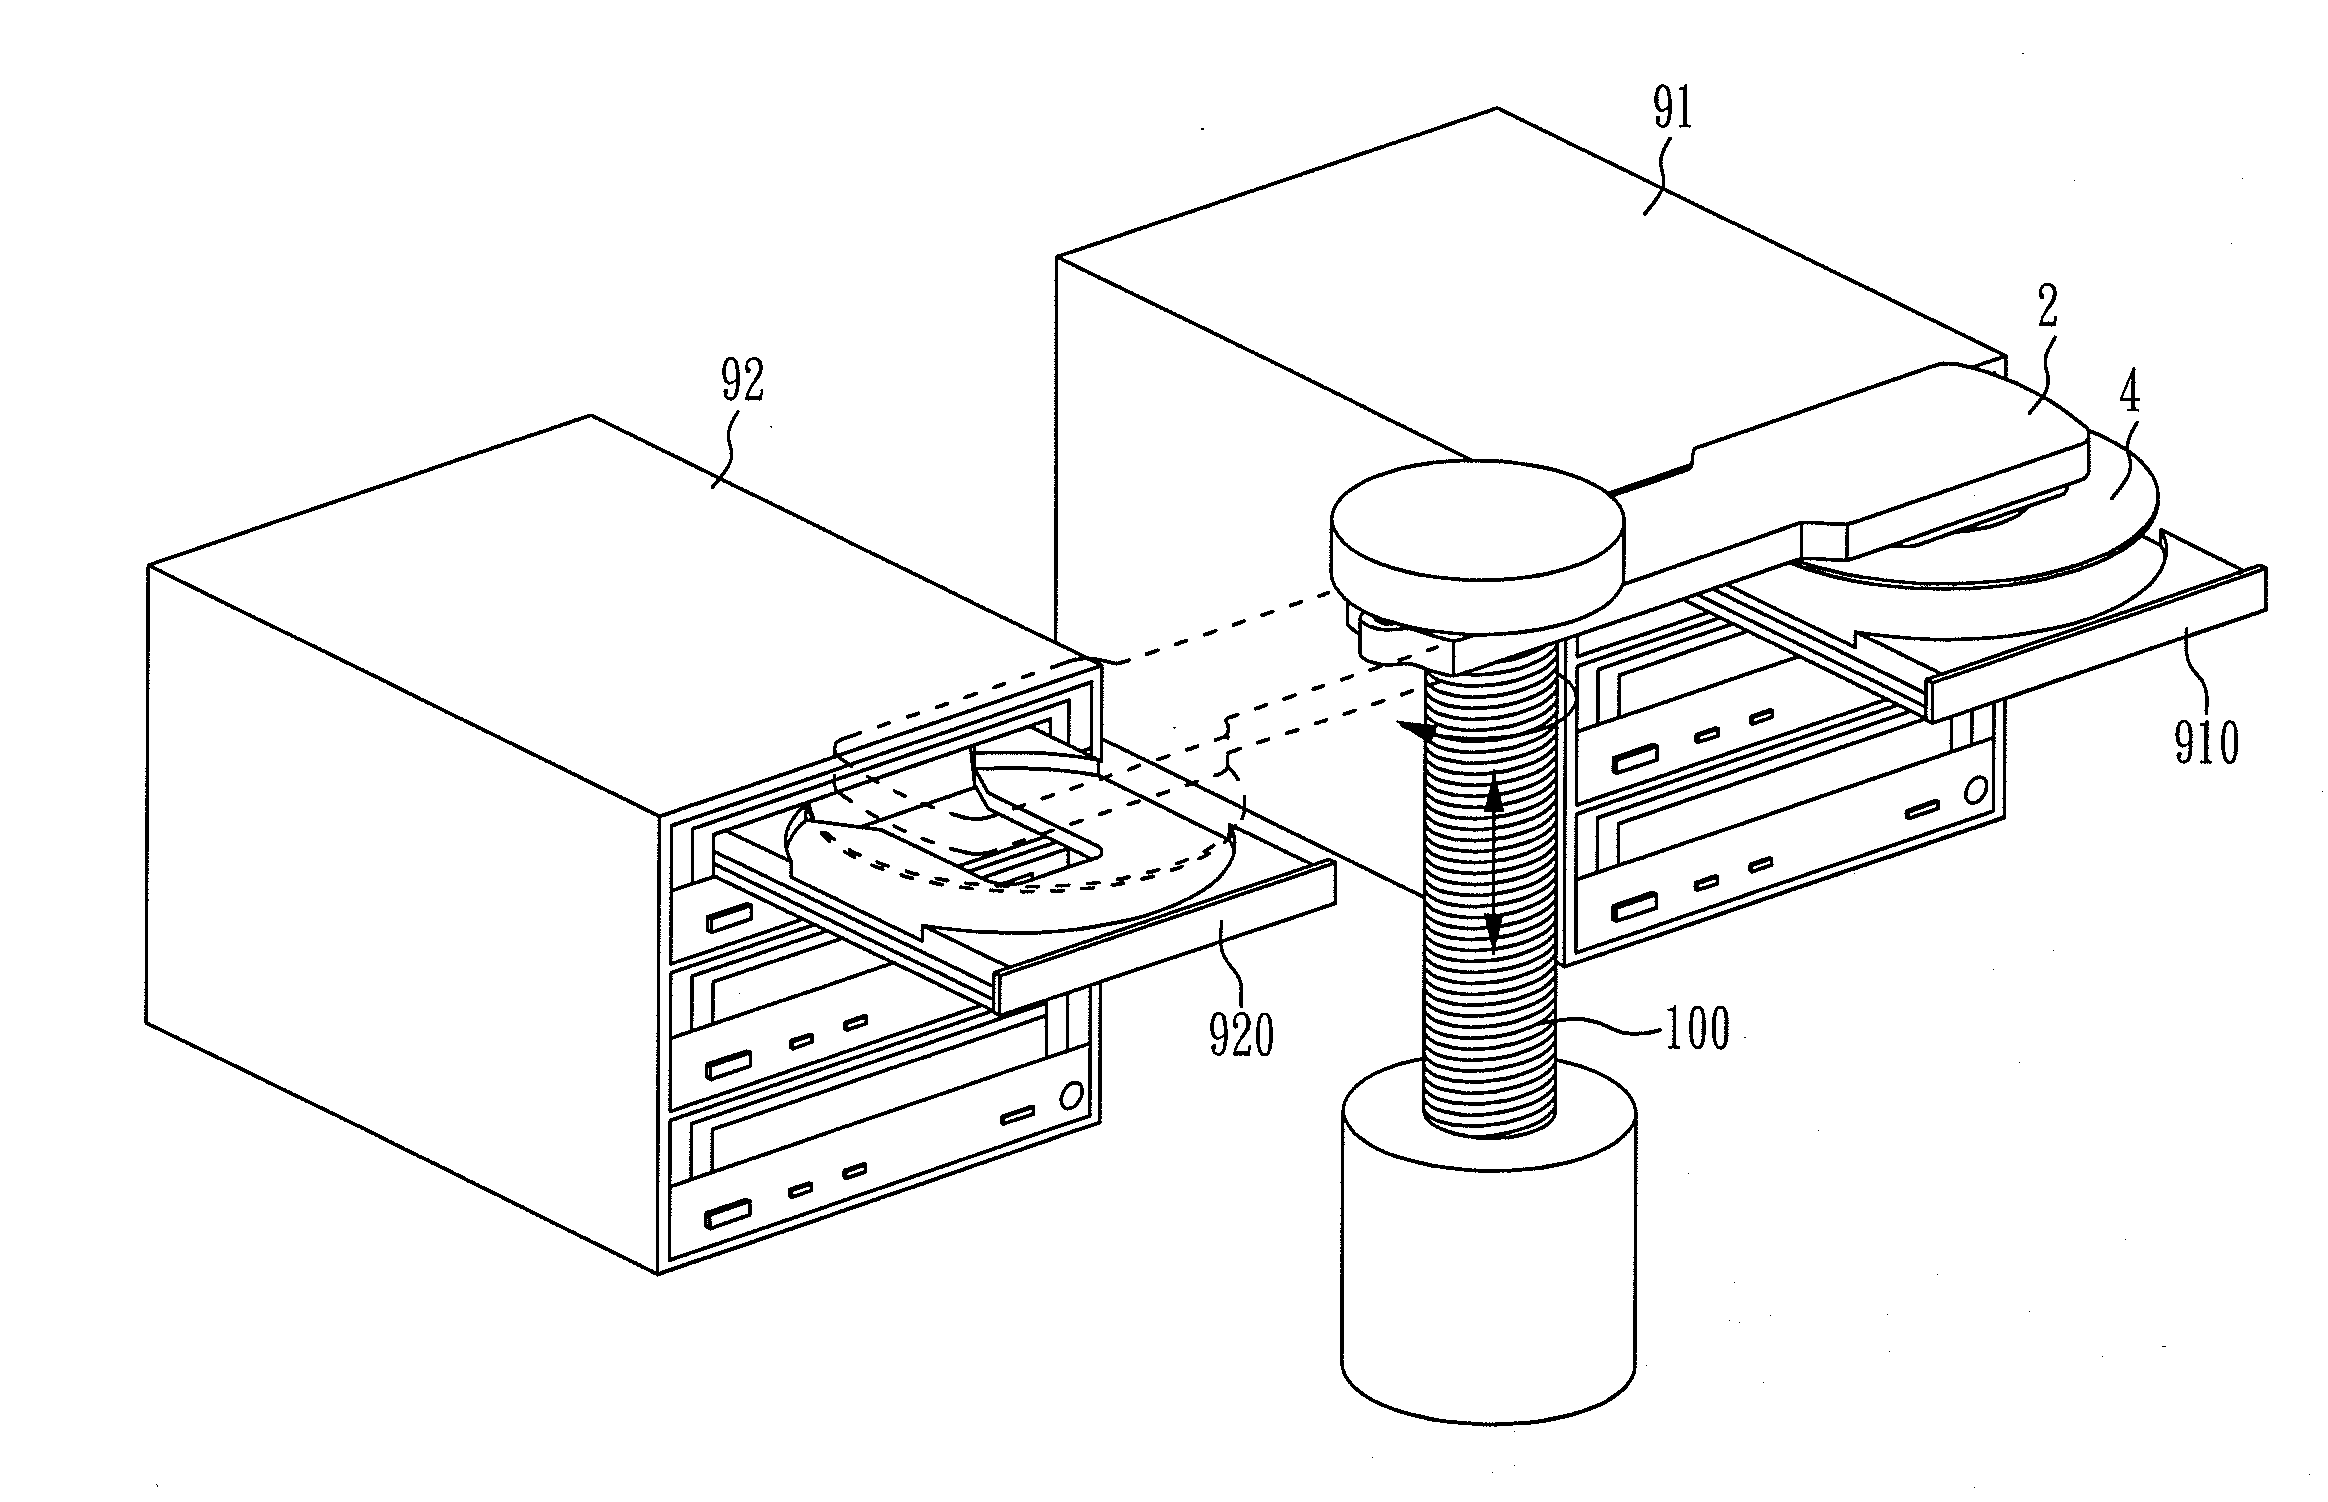 Transportation Arm Device for Carrying Discs